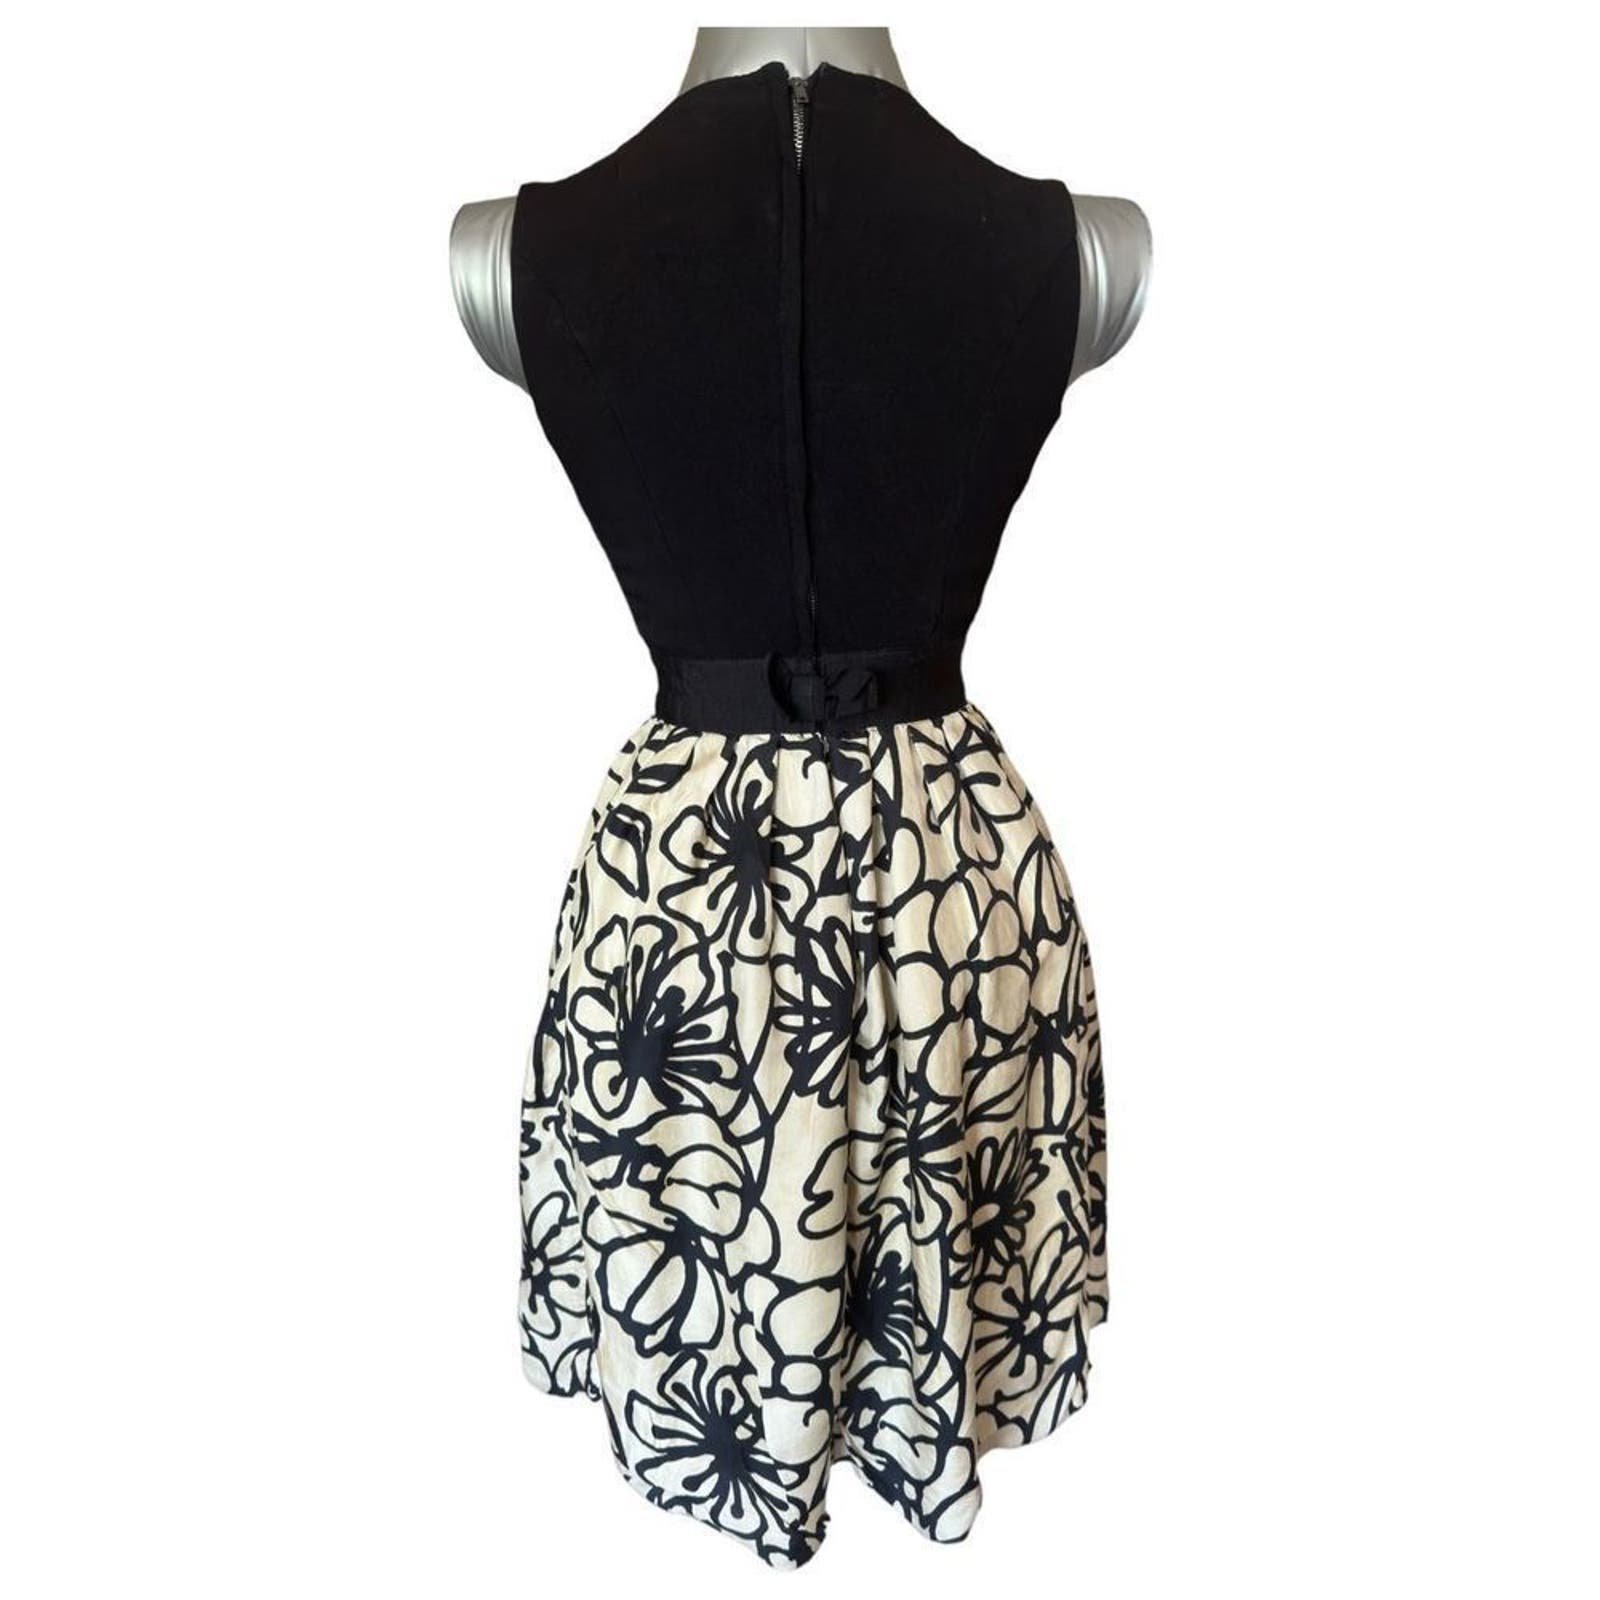 Beautiful Lord & Taylor Black White Floral Sleeveless Fit & Flare Mini Dress Size Small PRc0ryKsC New Style